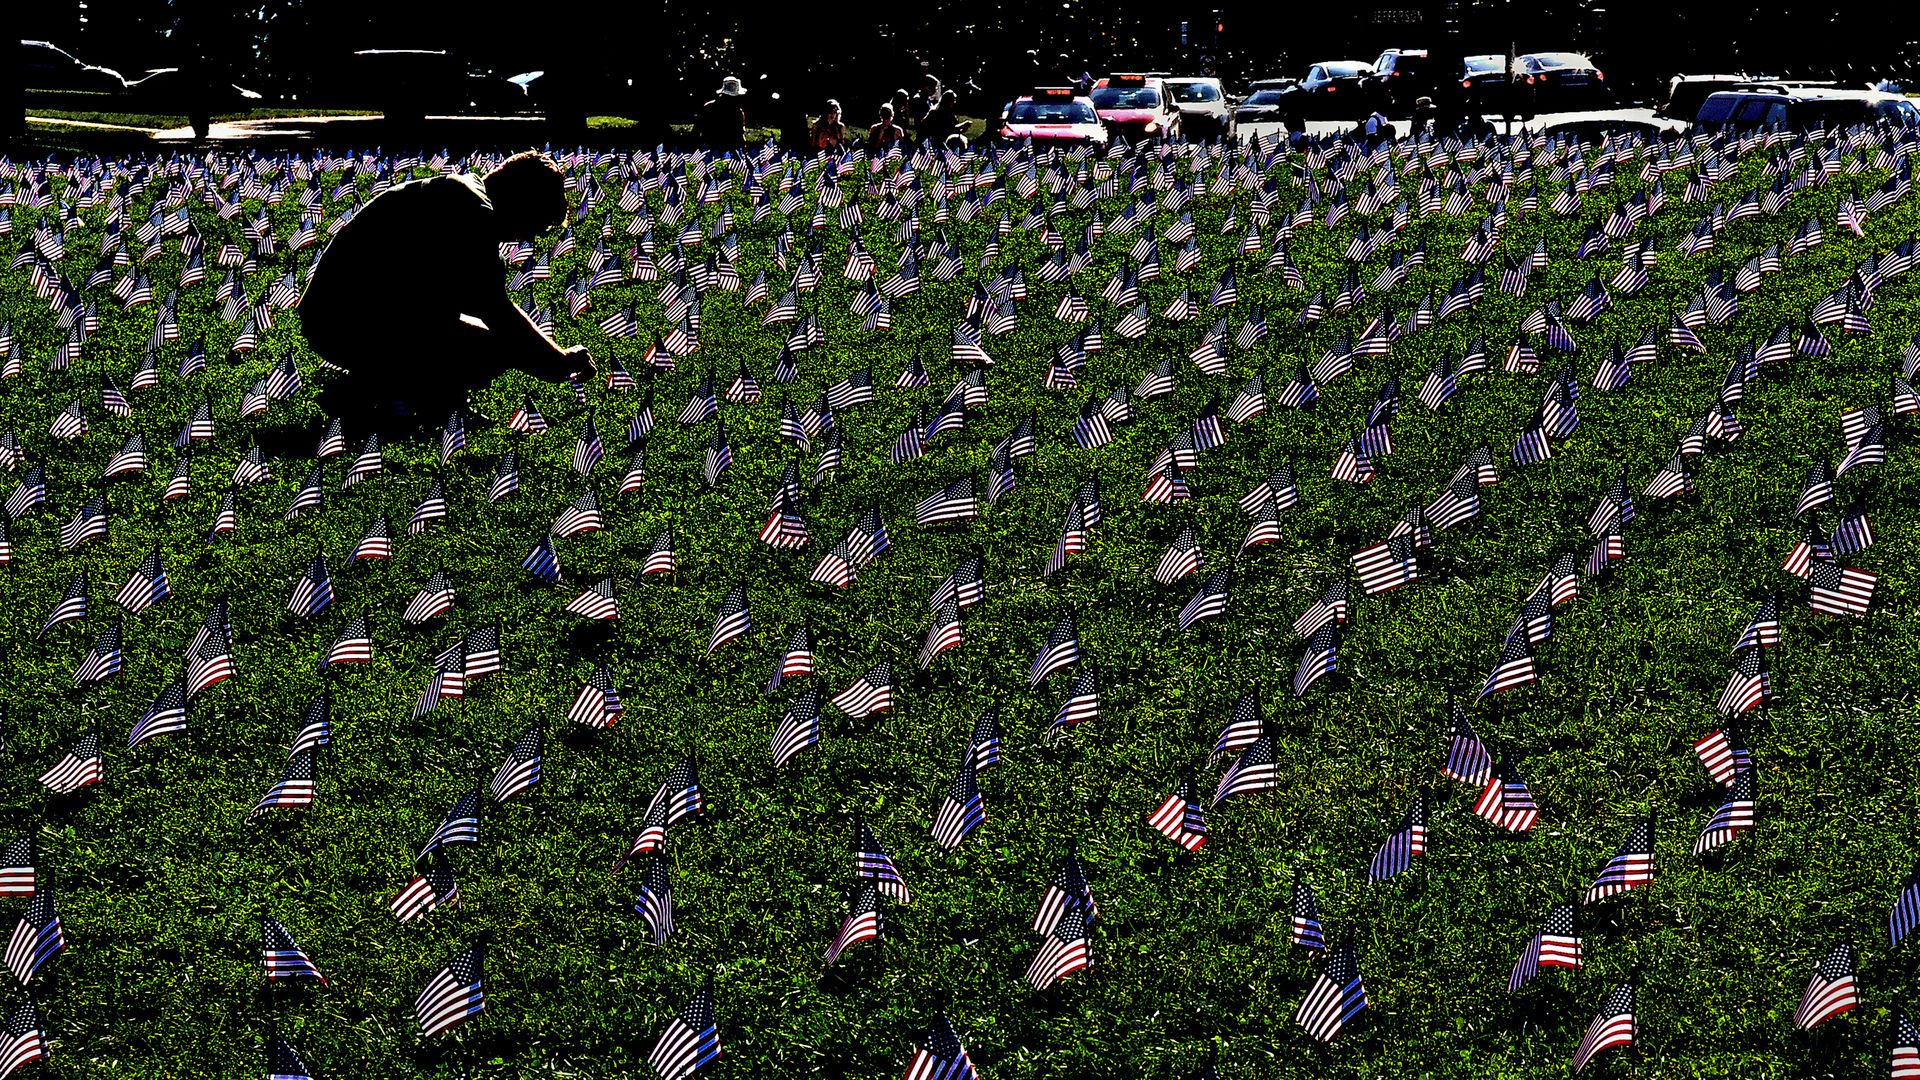 Picture of small American flags planted on a grassy area